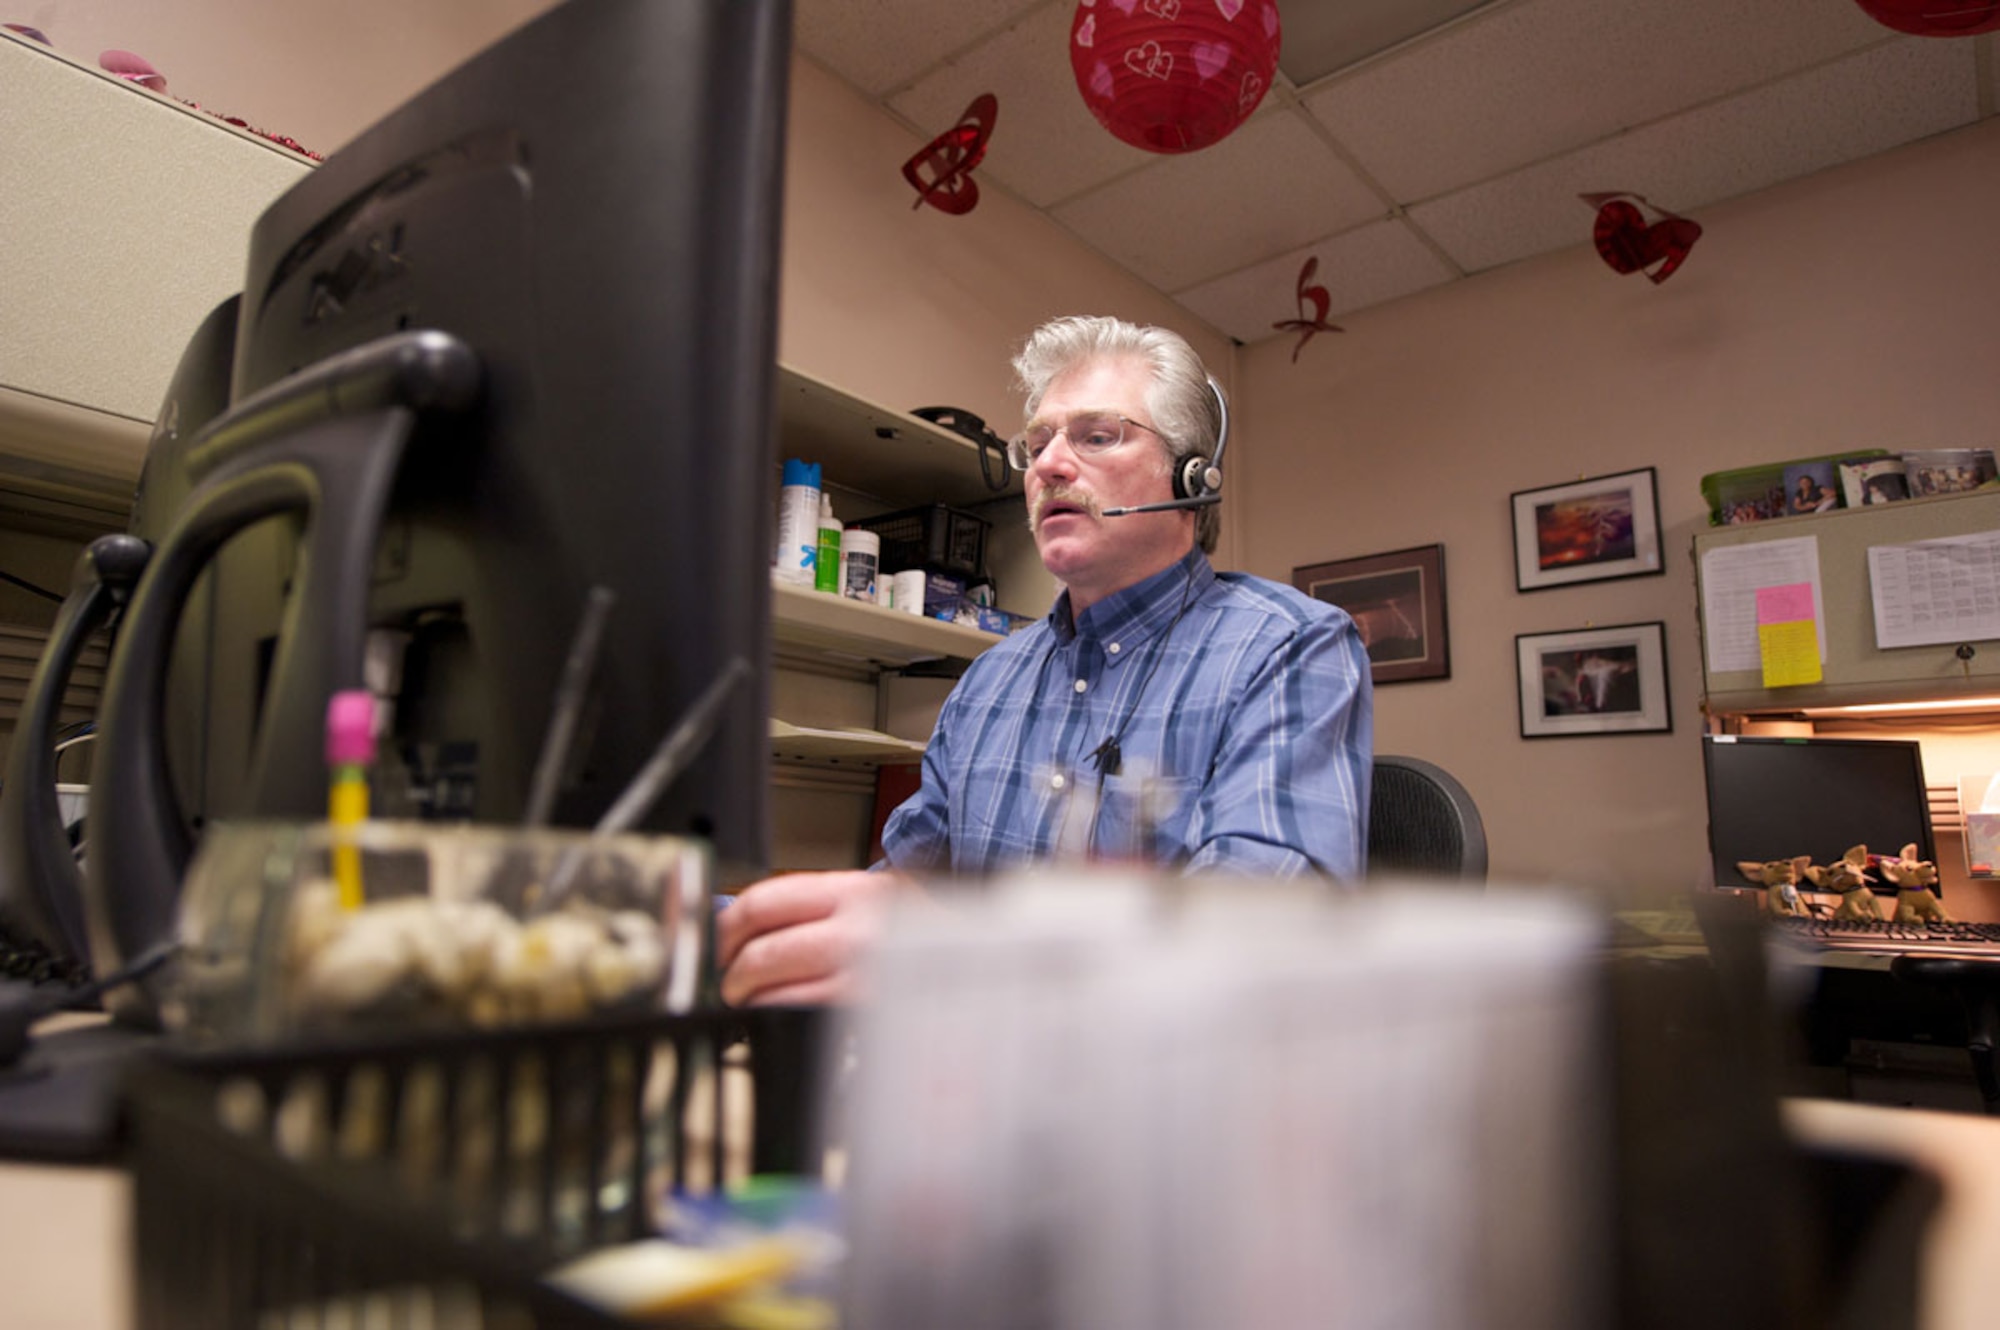 Doug Osborne, Joint Base Elmendorf-Richardson telephone operator, connects a call Jan. 20 at Telephone Operations. The Wasilla native said he most enjoys connecting deployed troops with their families at home. (U.S. Air Force photo/David Bedard)